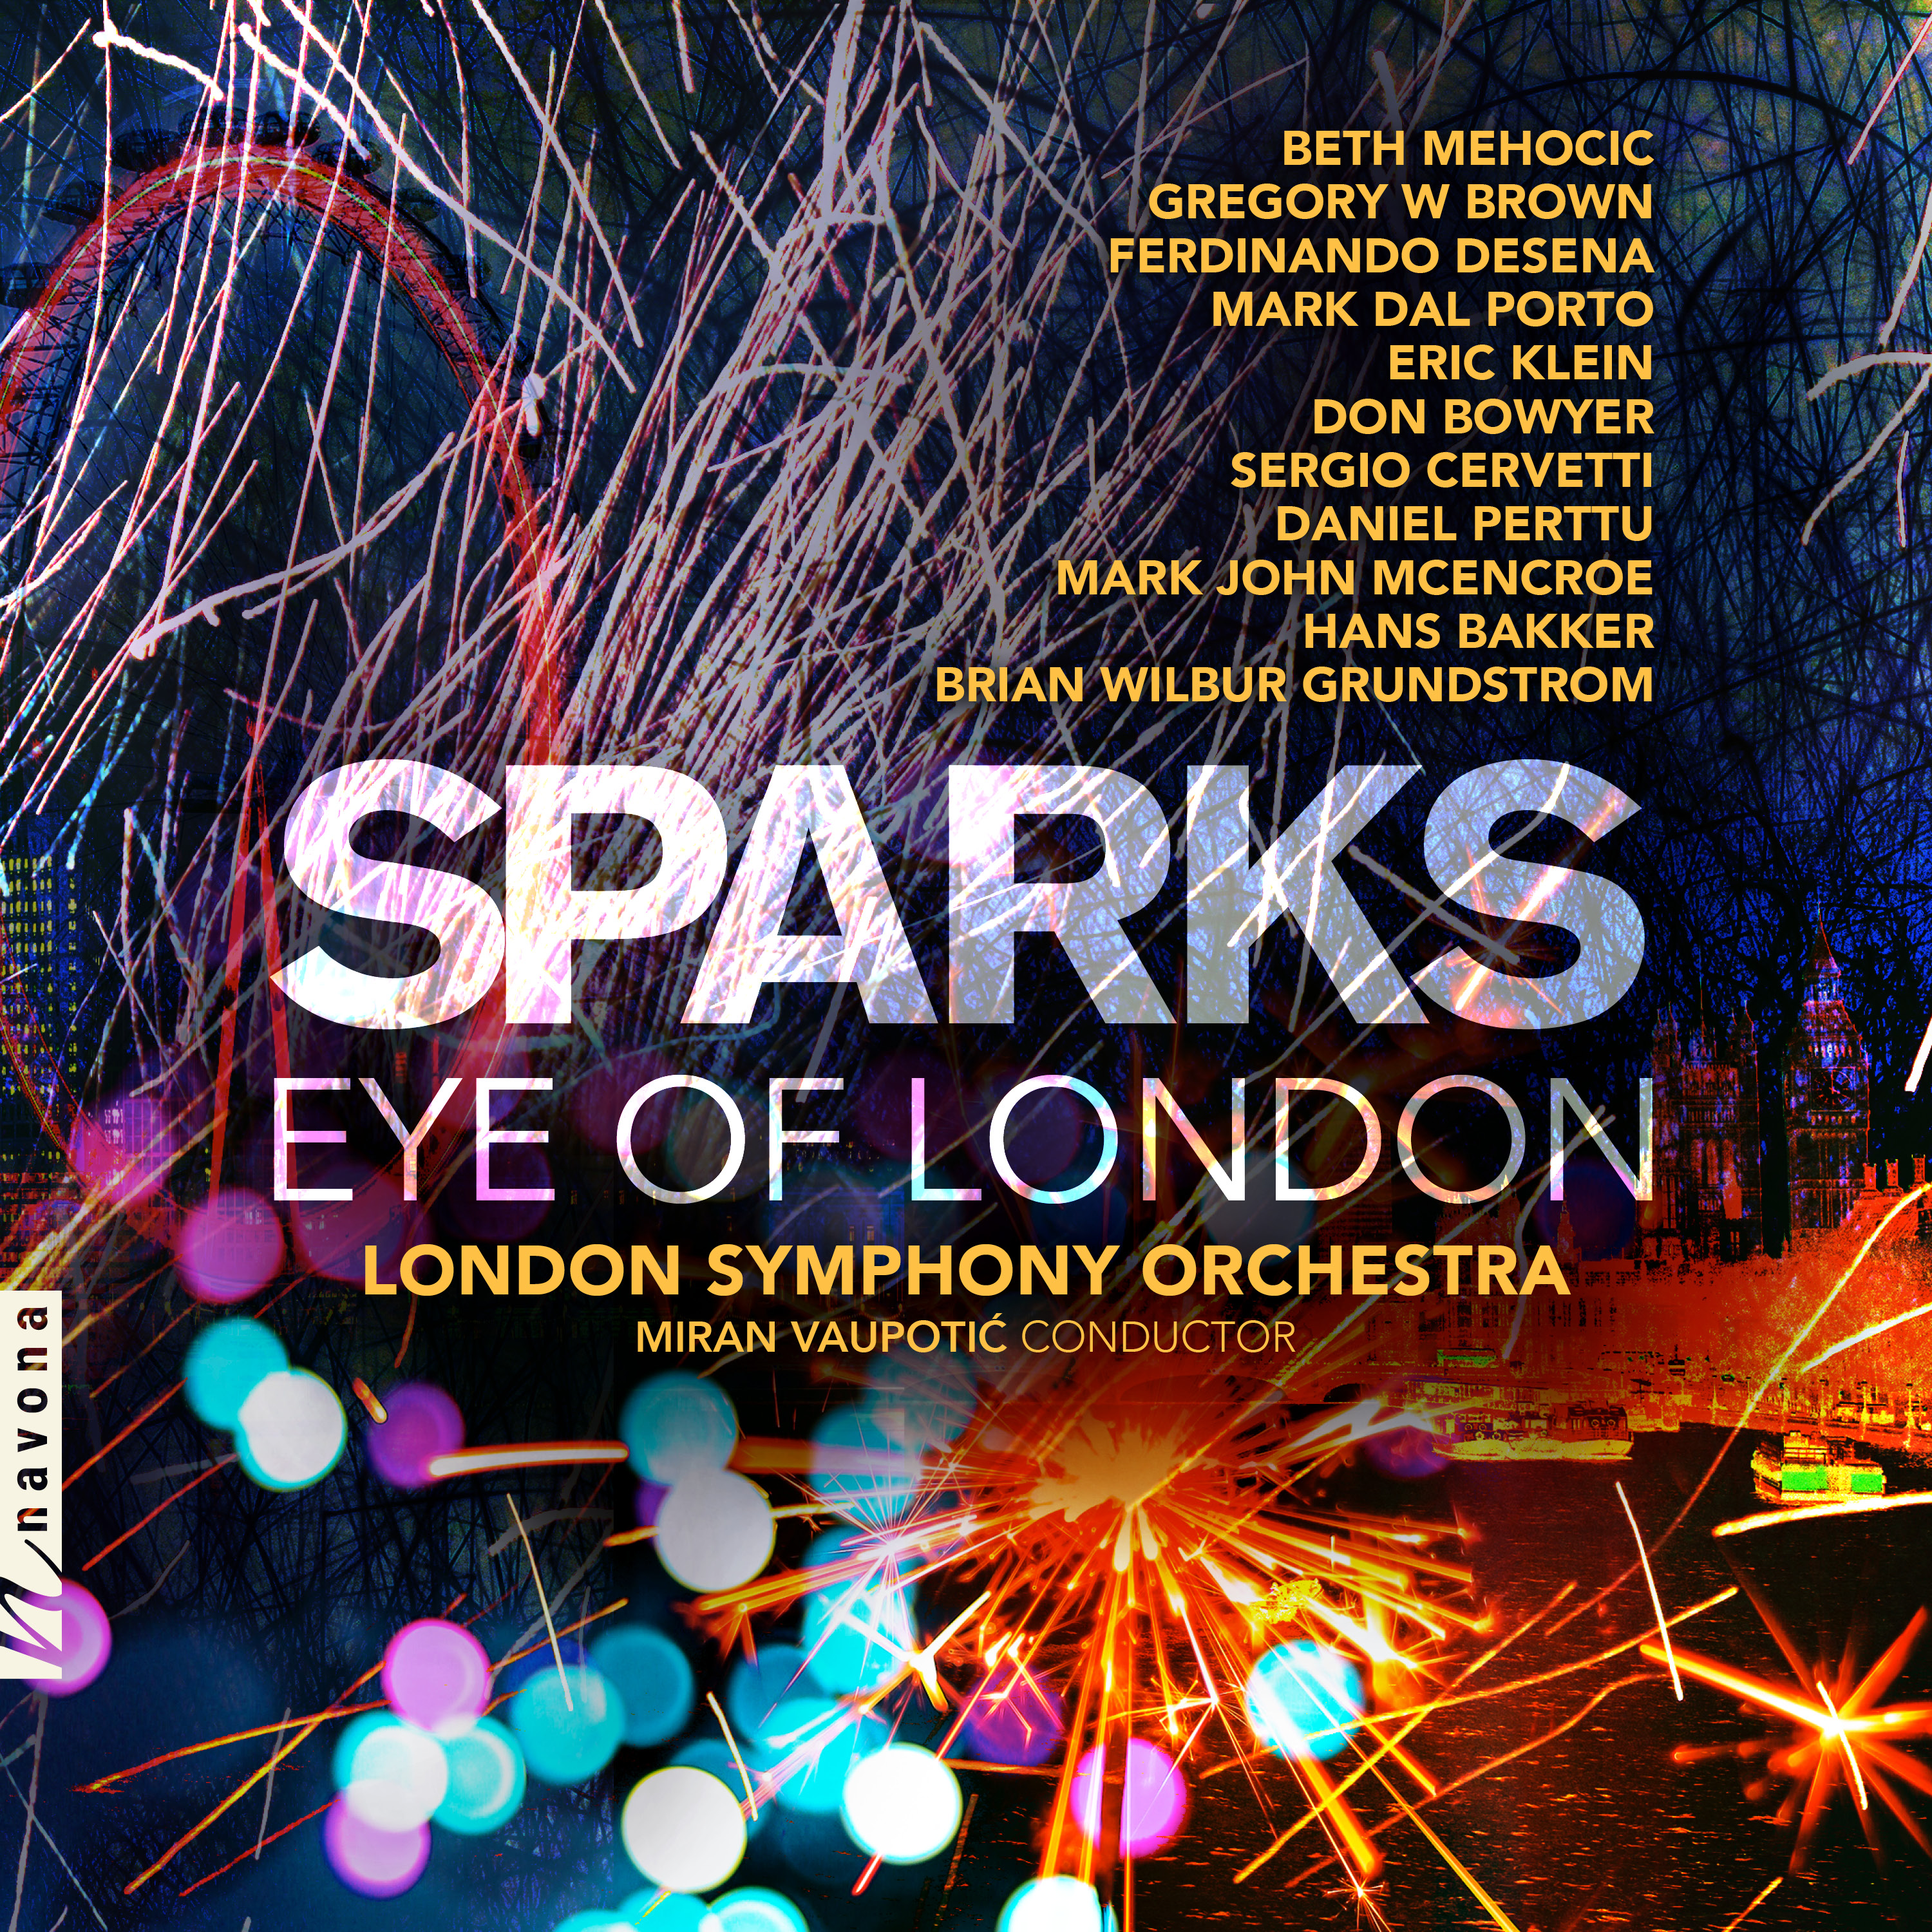 Album cover Sparks Eye of London with London Symphony Orchestra